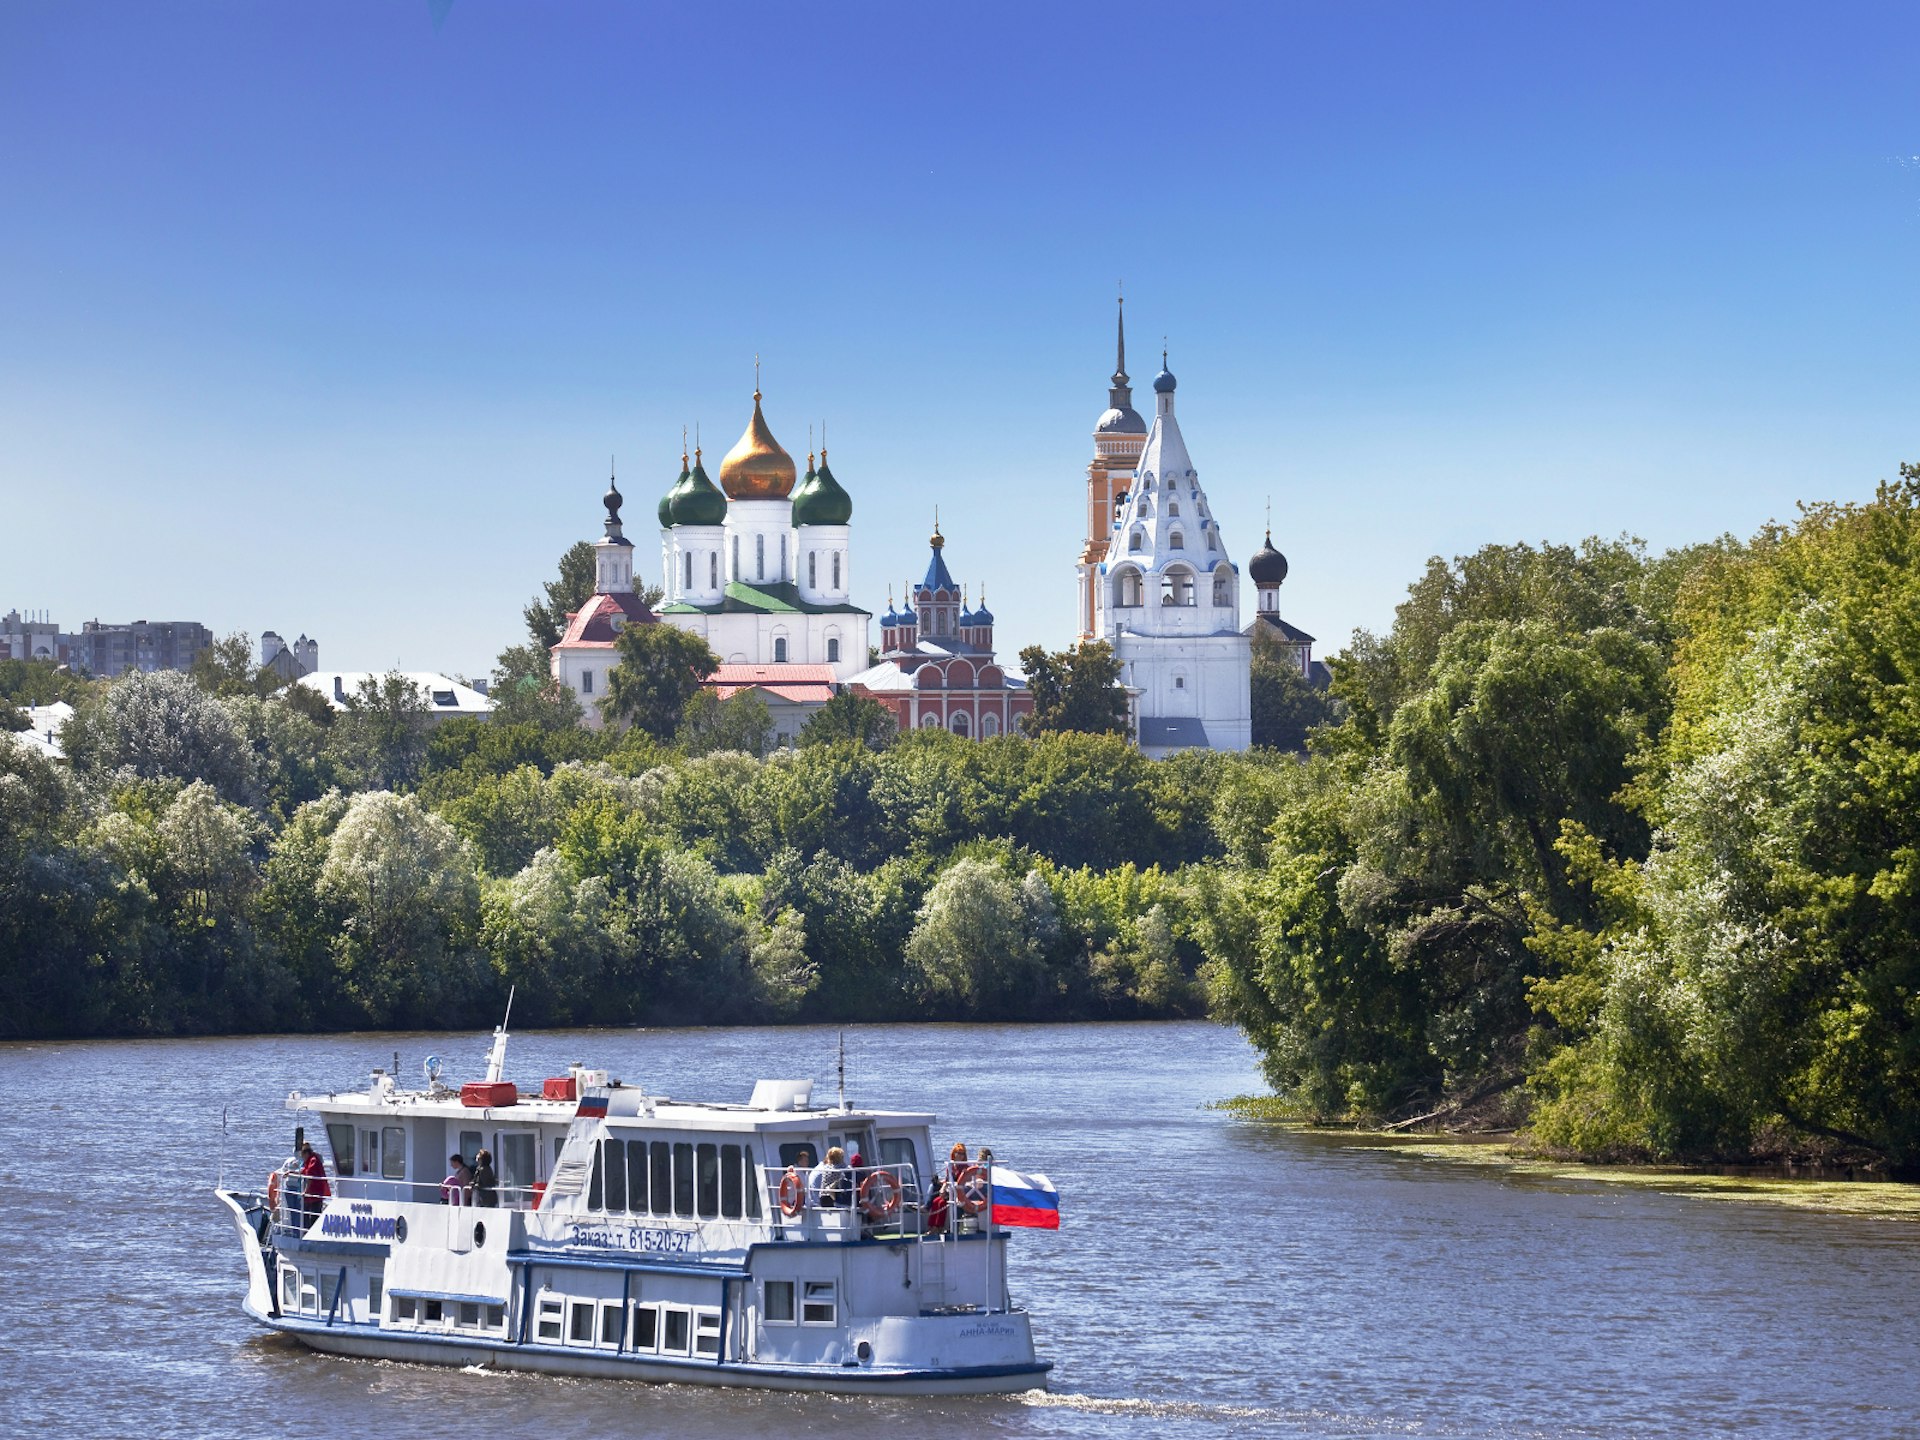 The kremlin in Kolomna, a popular day trip from Moscow and a stop for river cruises © Natalia Volkova / Shutterstock